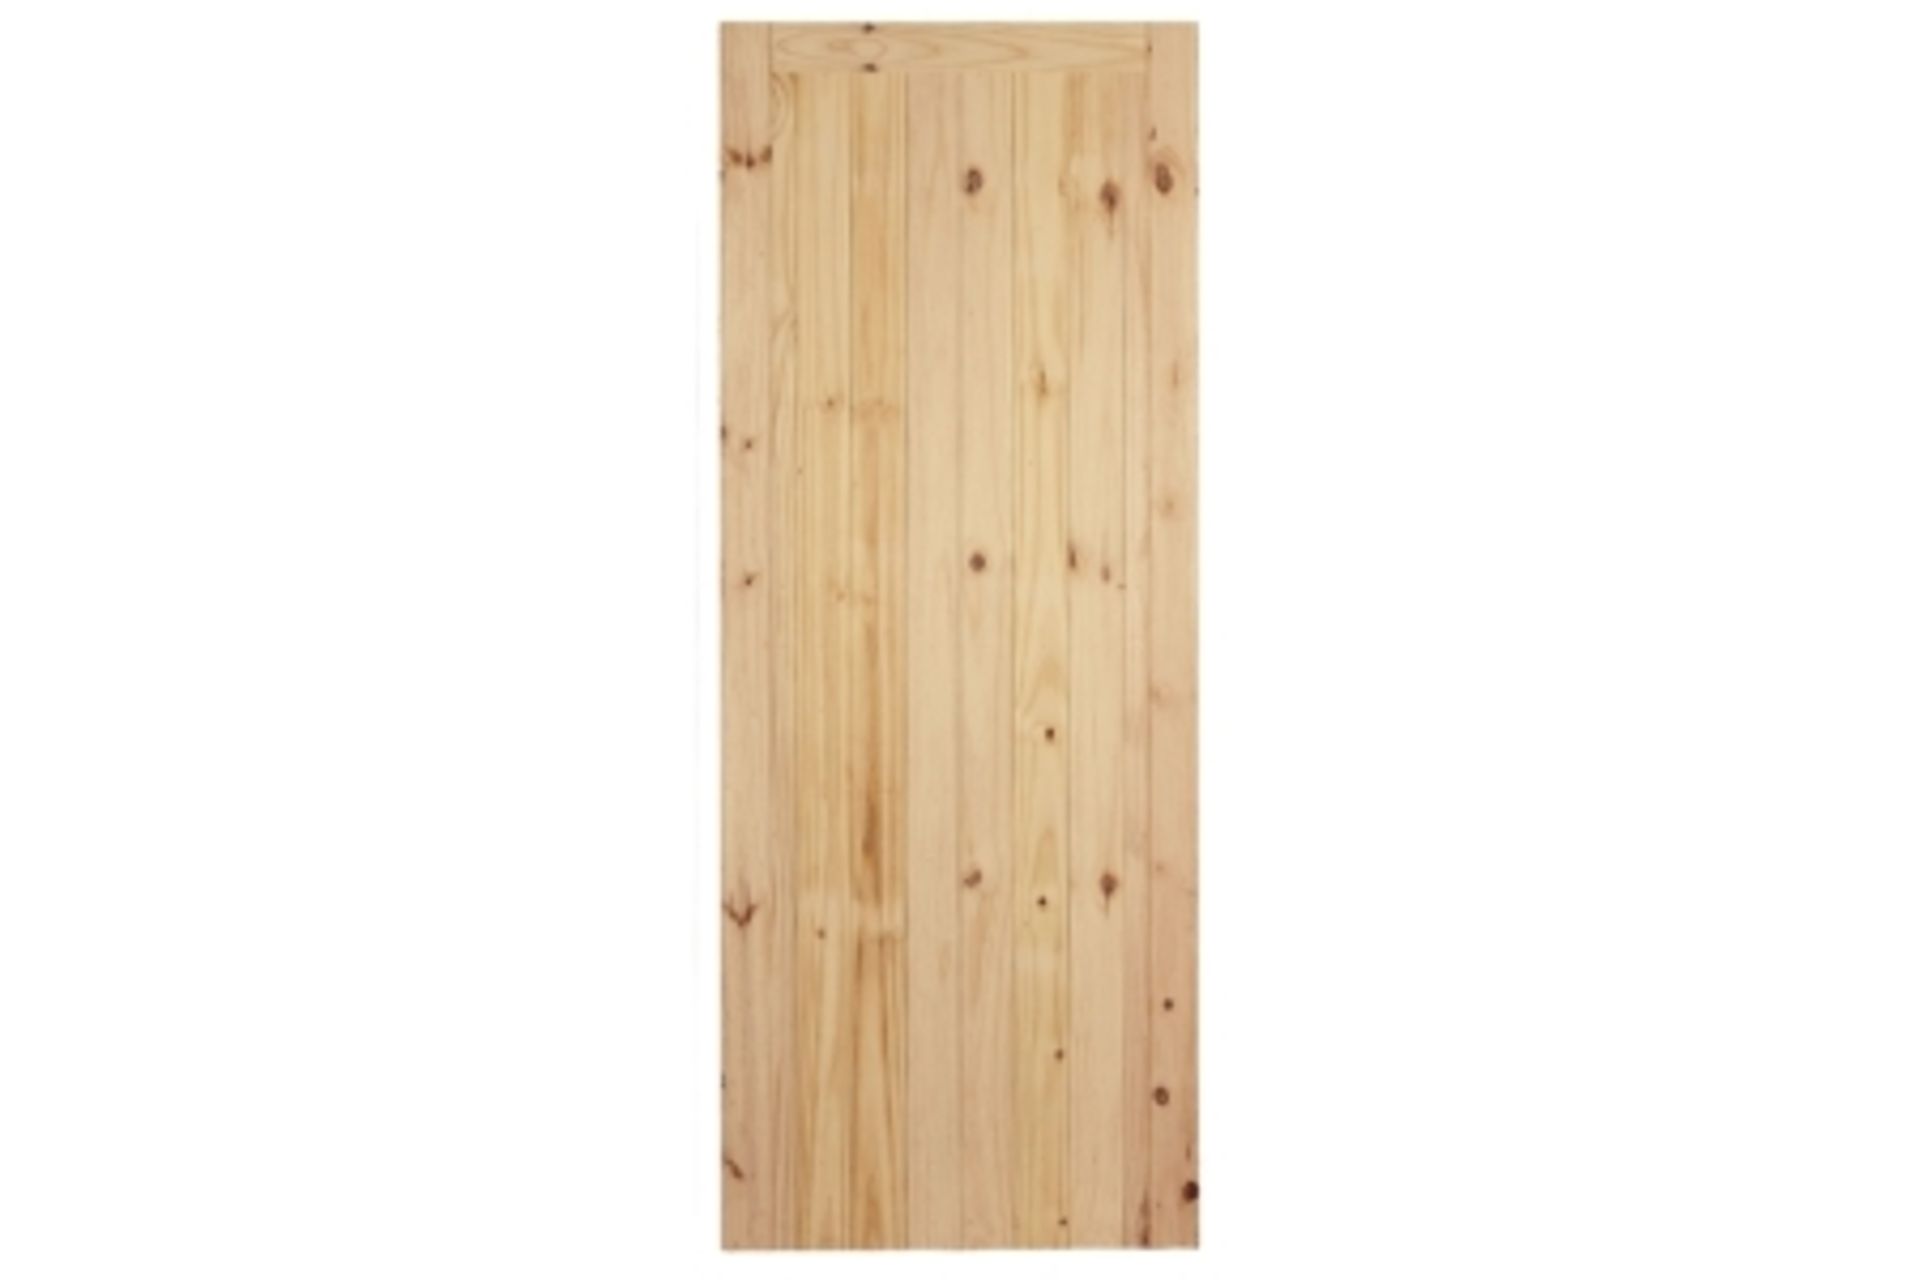 4 X MIXED PANEL DOORS/GLAZED DOORS INCLUDING CLEAR PINE, OAK VENEER, KNOTTY PINES AND MORE (CONTAINS - Image 5 of 5